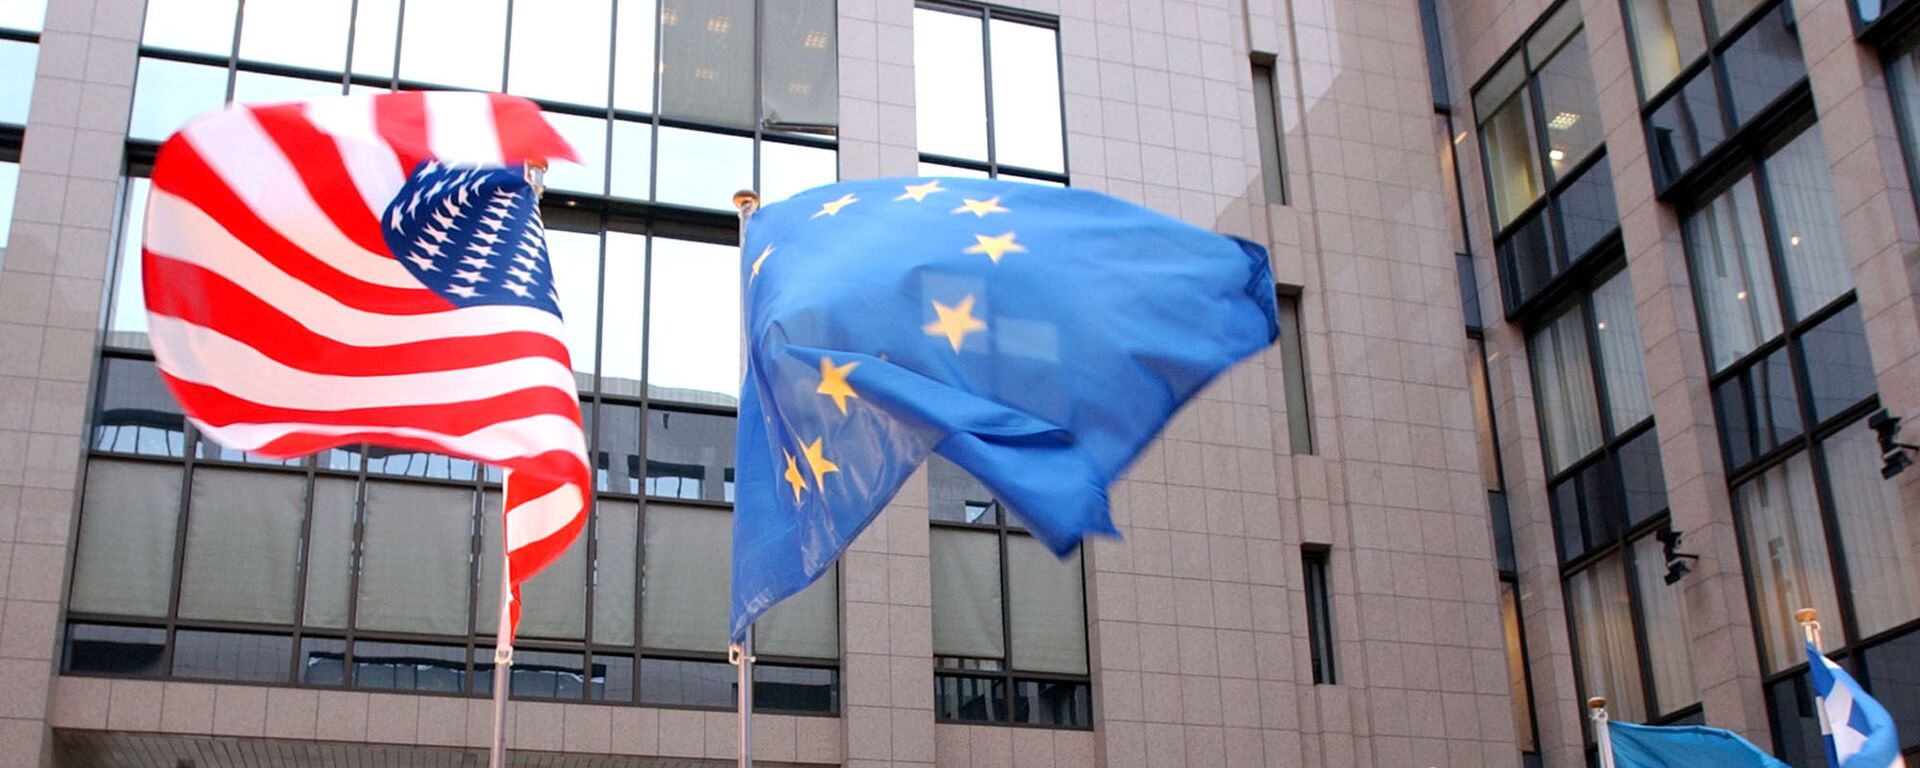 The US and EU flags, top left and right, fly in separate directions at the European Council building in Brussels - Sputnik Moldova, 1920, 01.12.2022